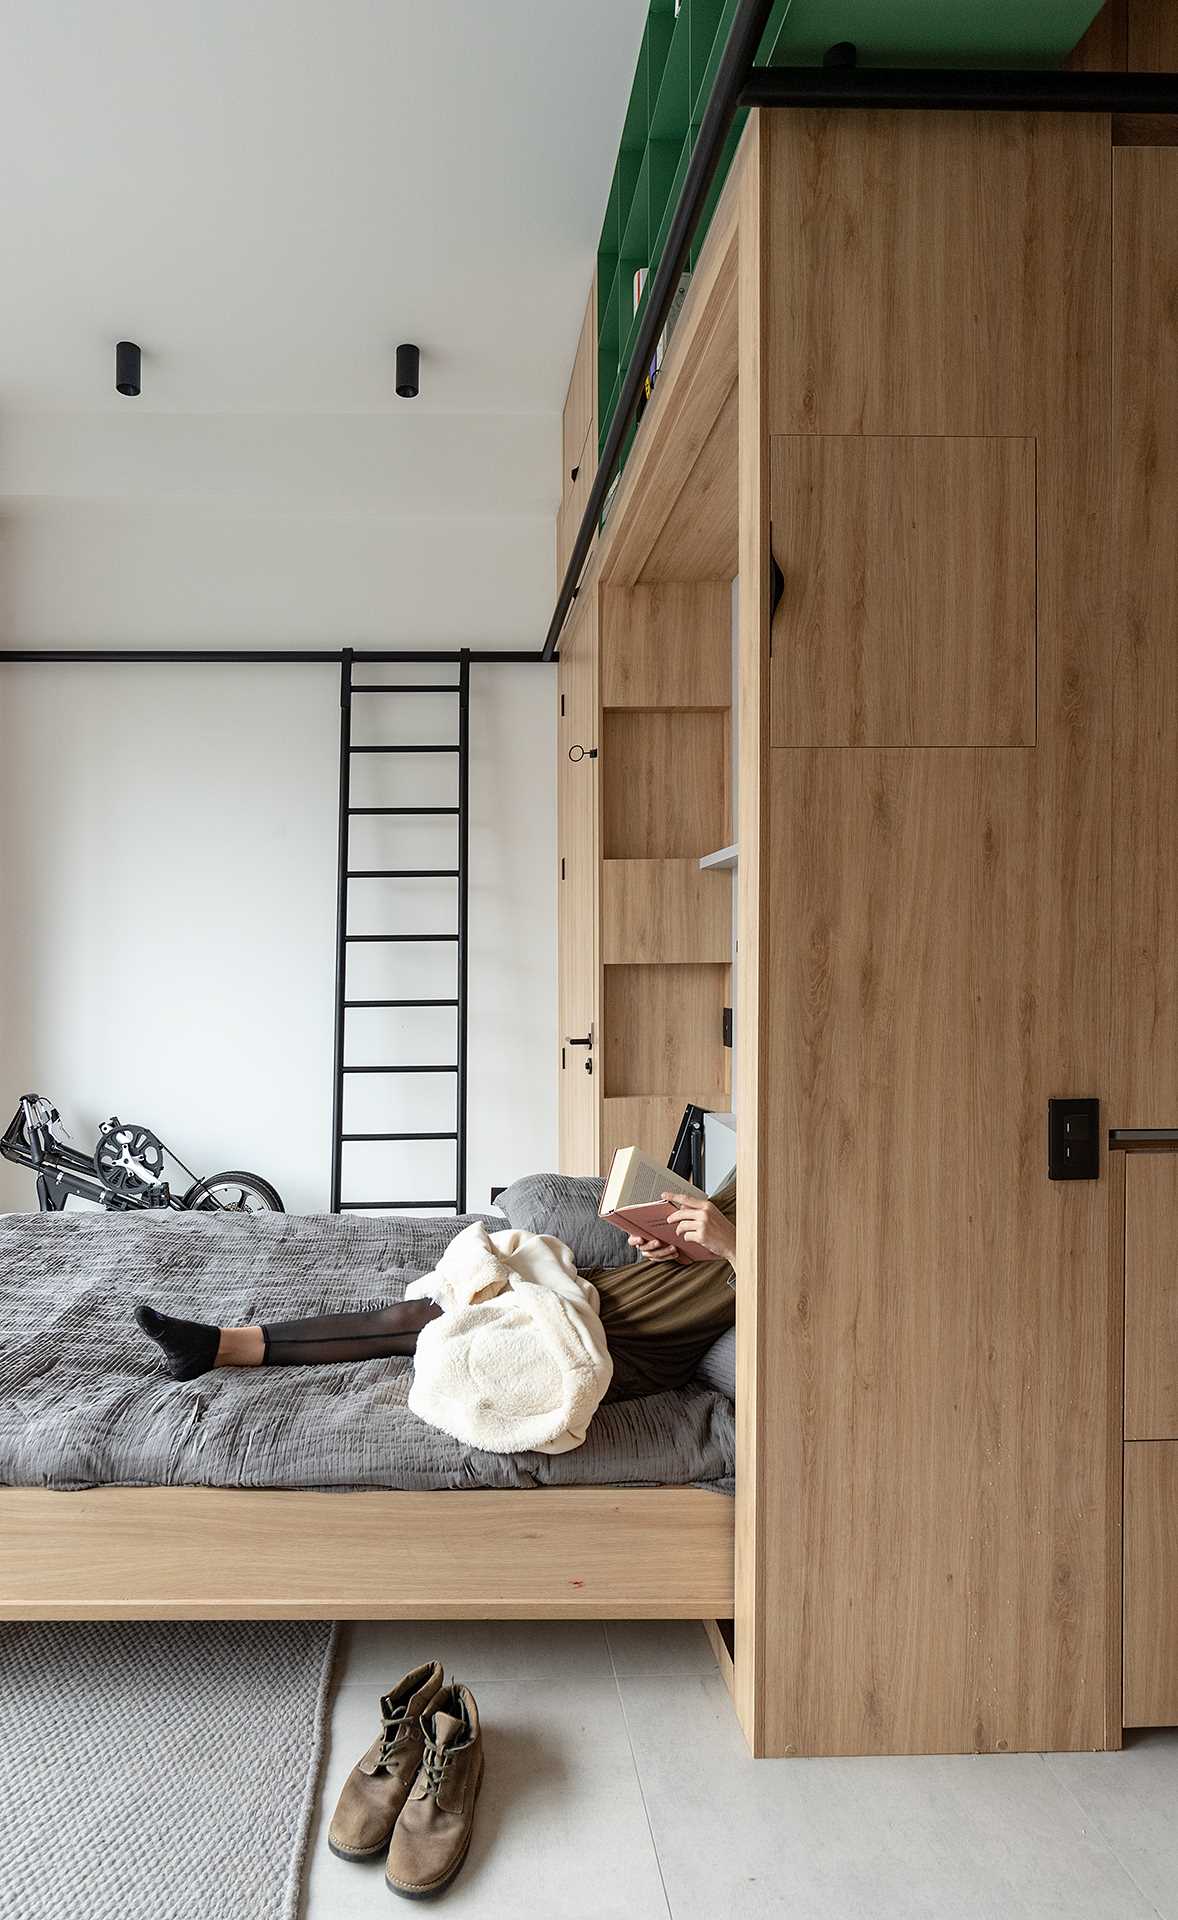 This studio apartment includes a variety of hidden features, like a fold down bed.